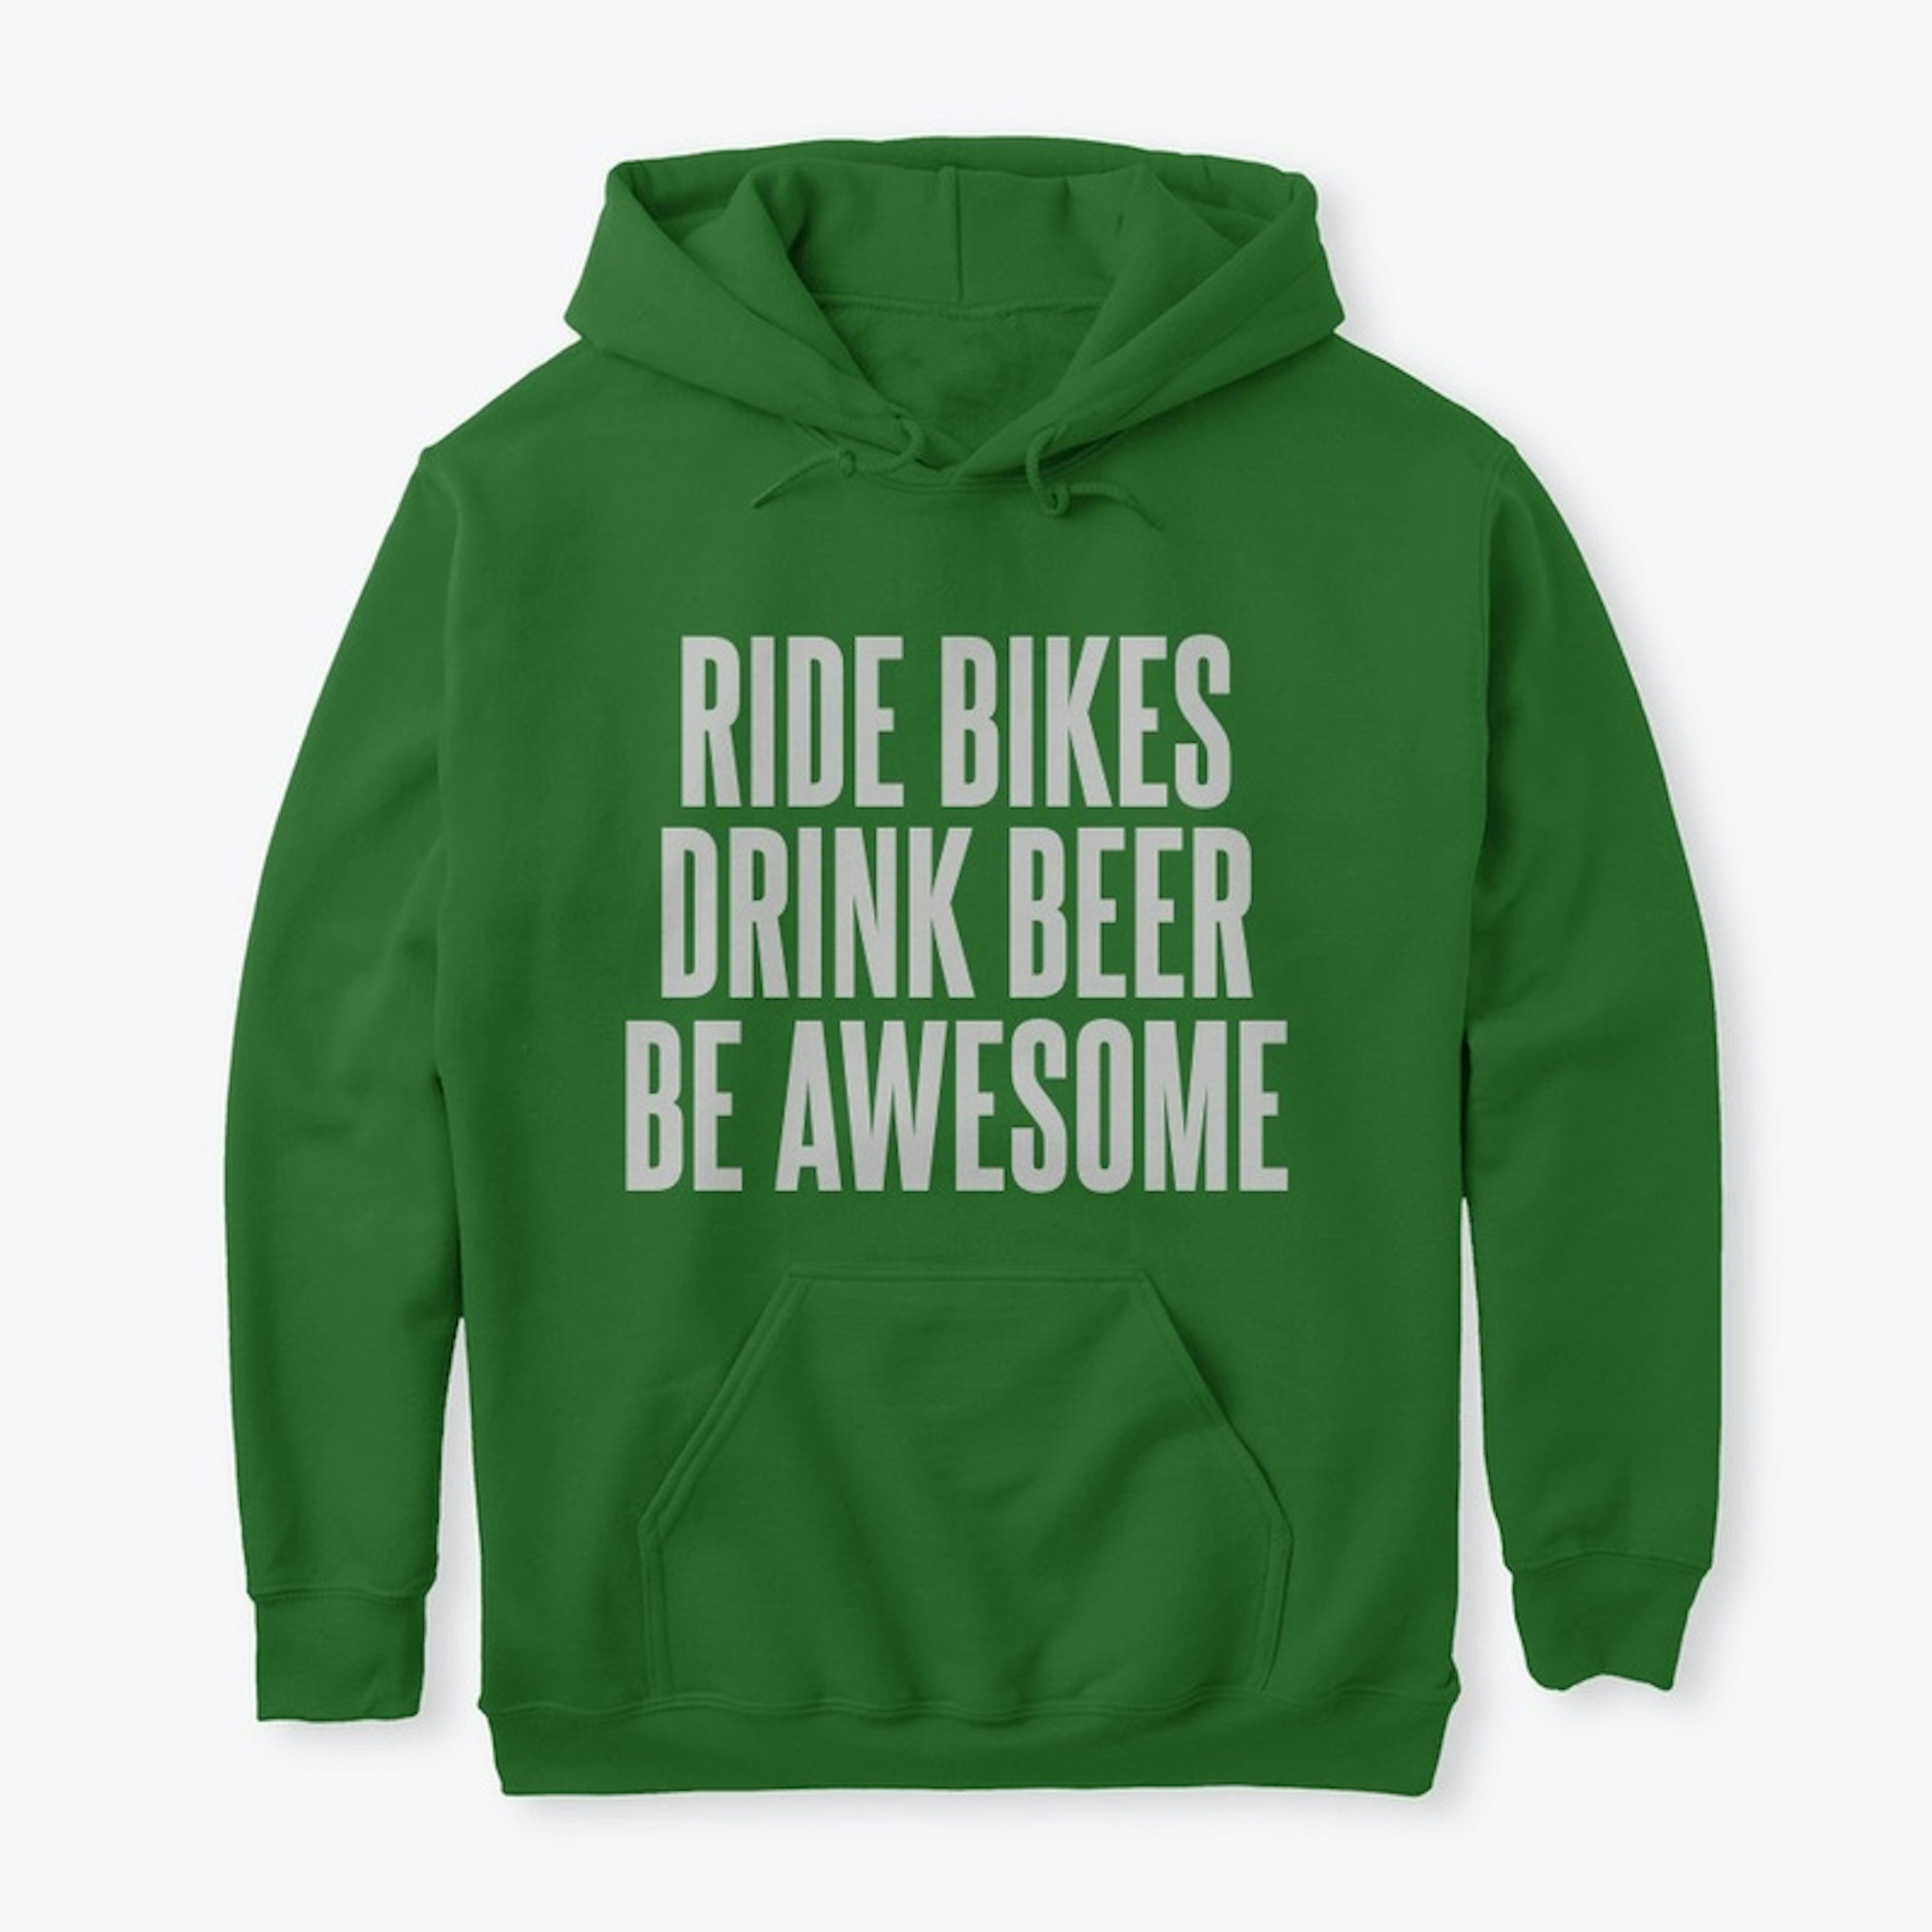 RIDE BIKES DRINK BEER BE AWESOME 